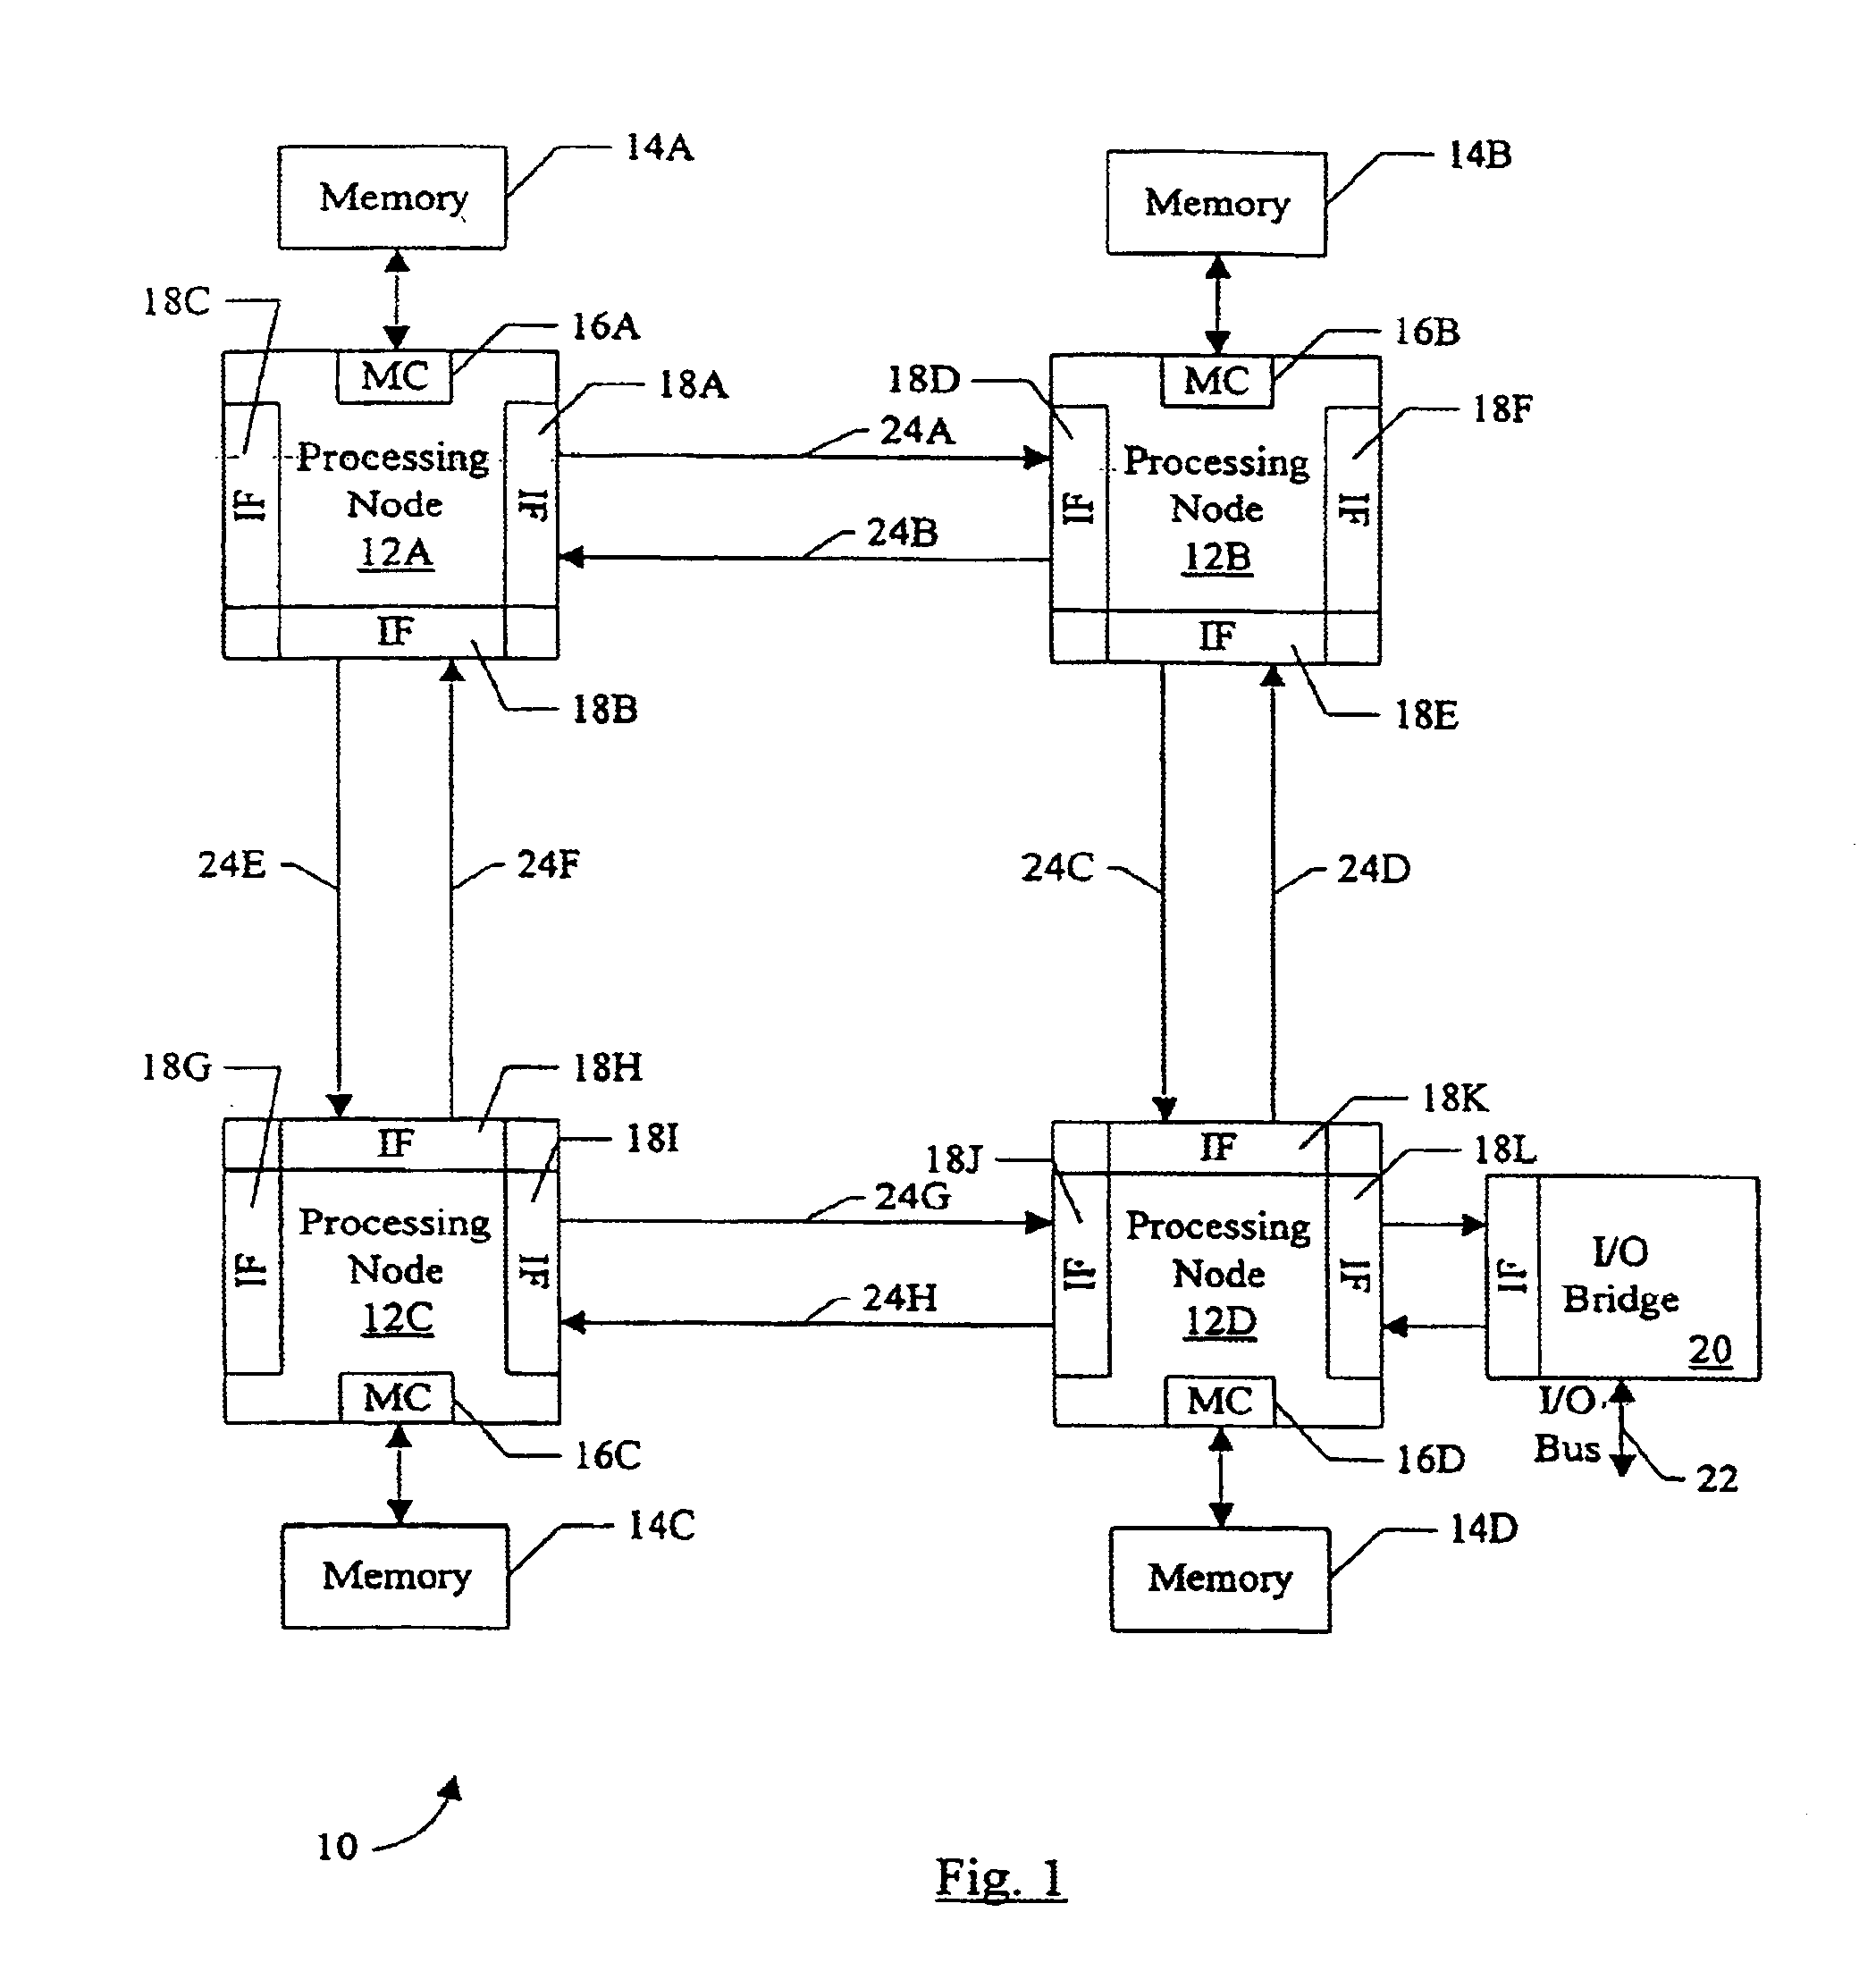 System and method for implementing a separate virtual channel for posted requests in a multiprocessor computer system